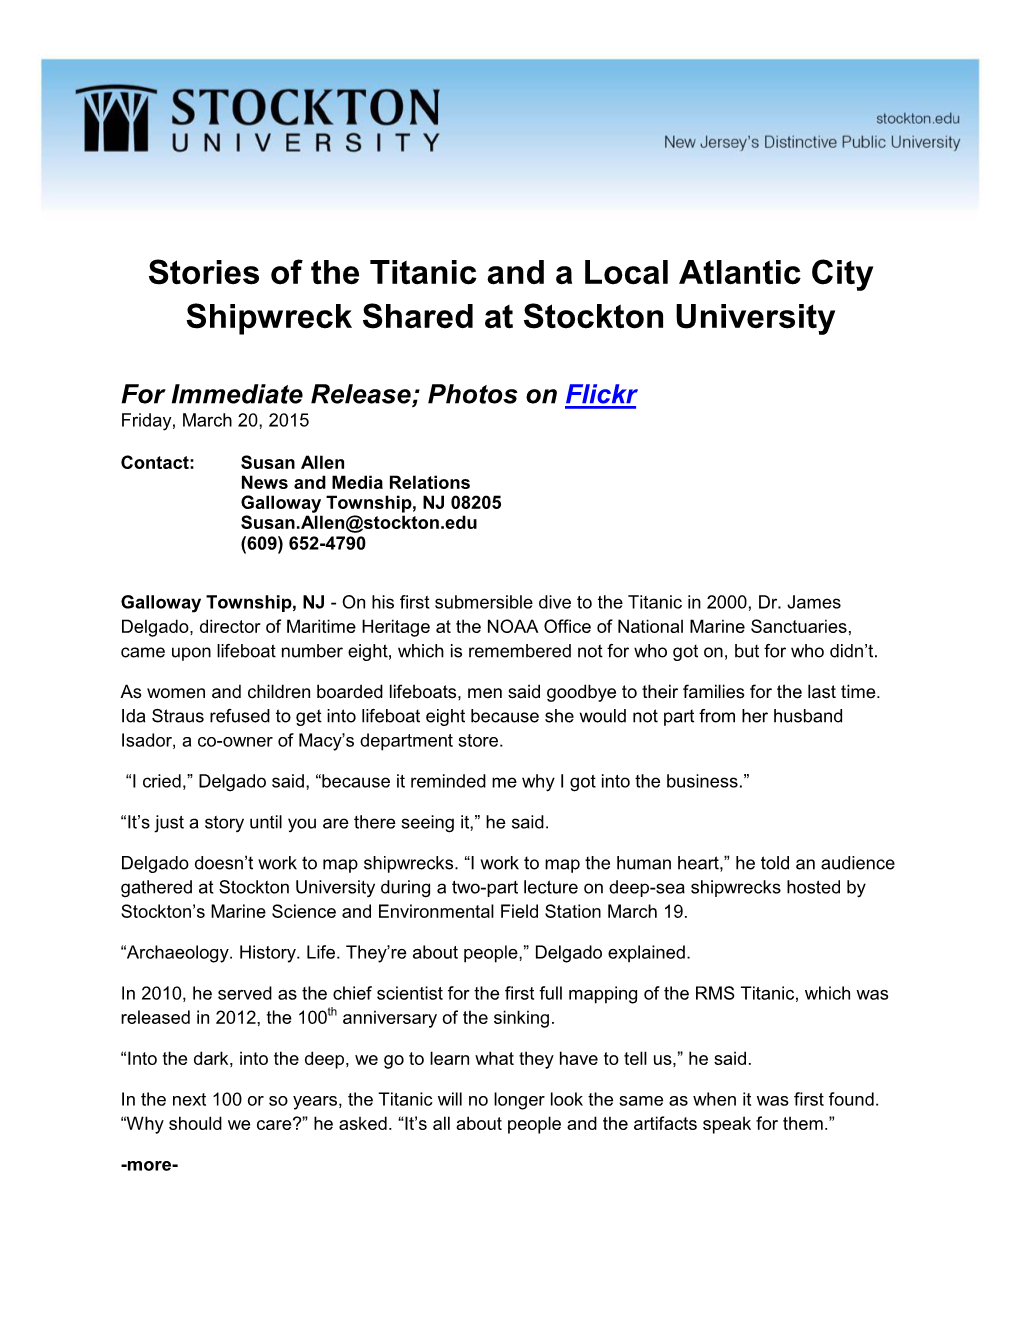 Stories of the Titanic and a Local Atlantic City Shipwreck Shared at Stockton University